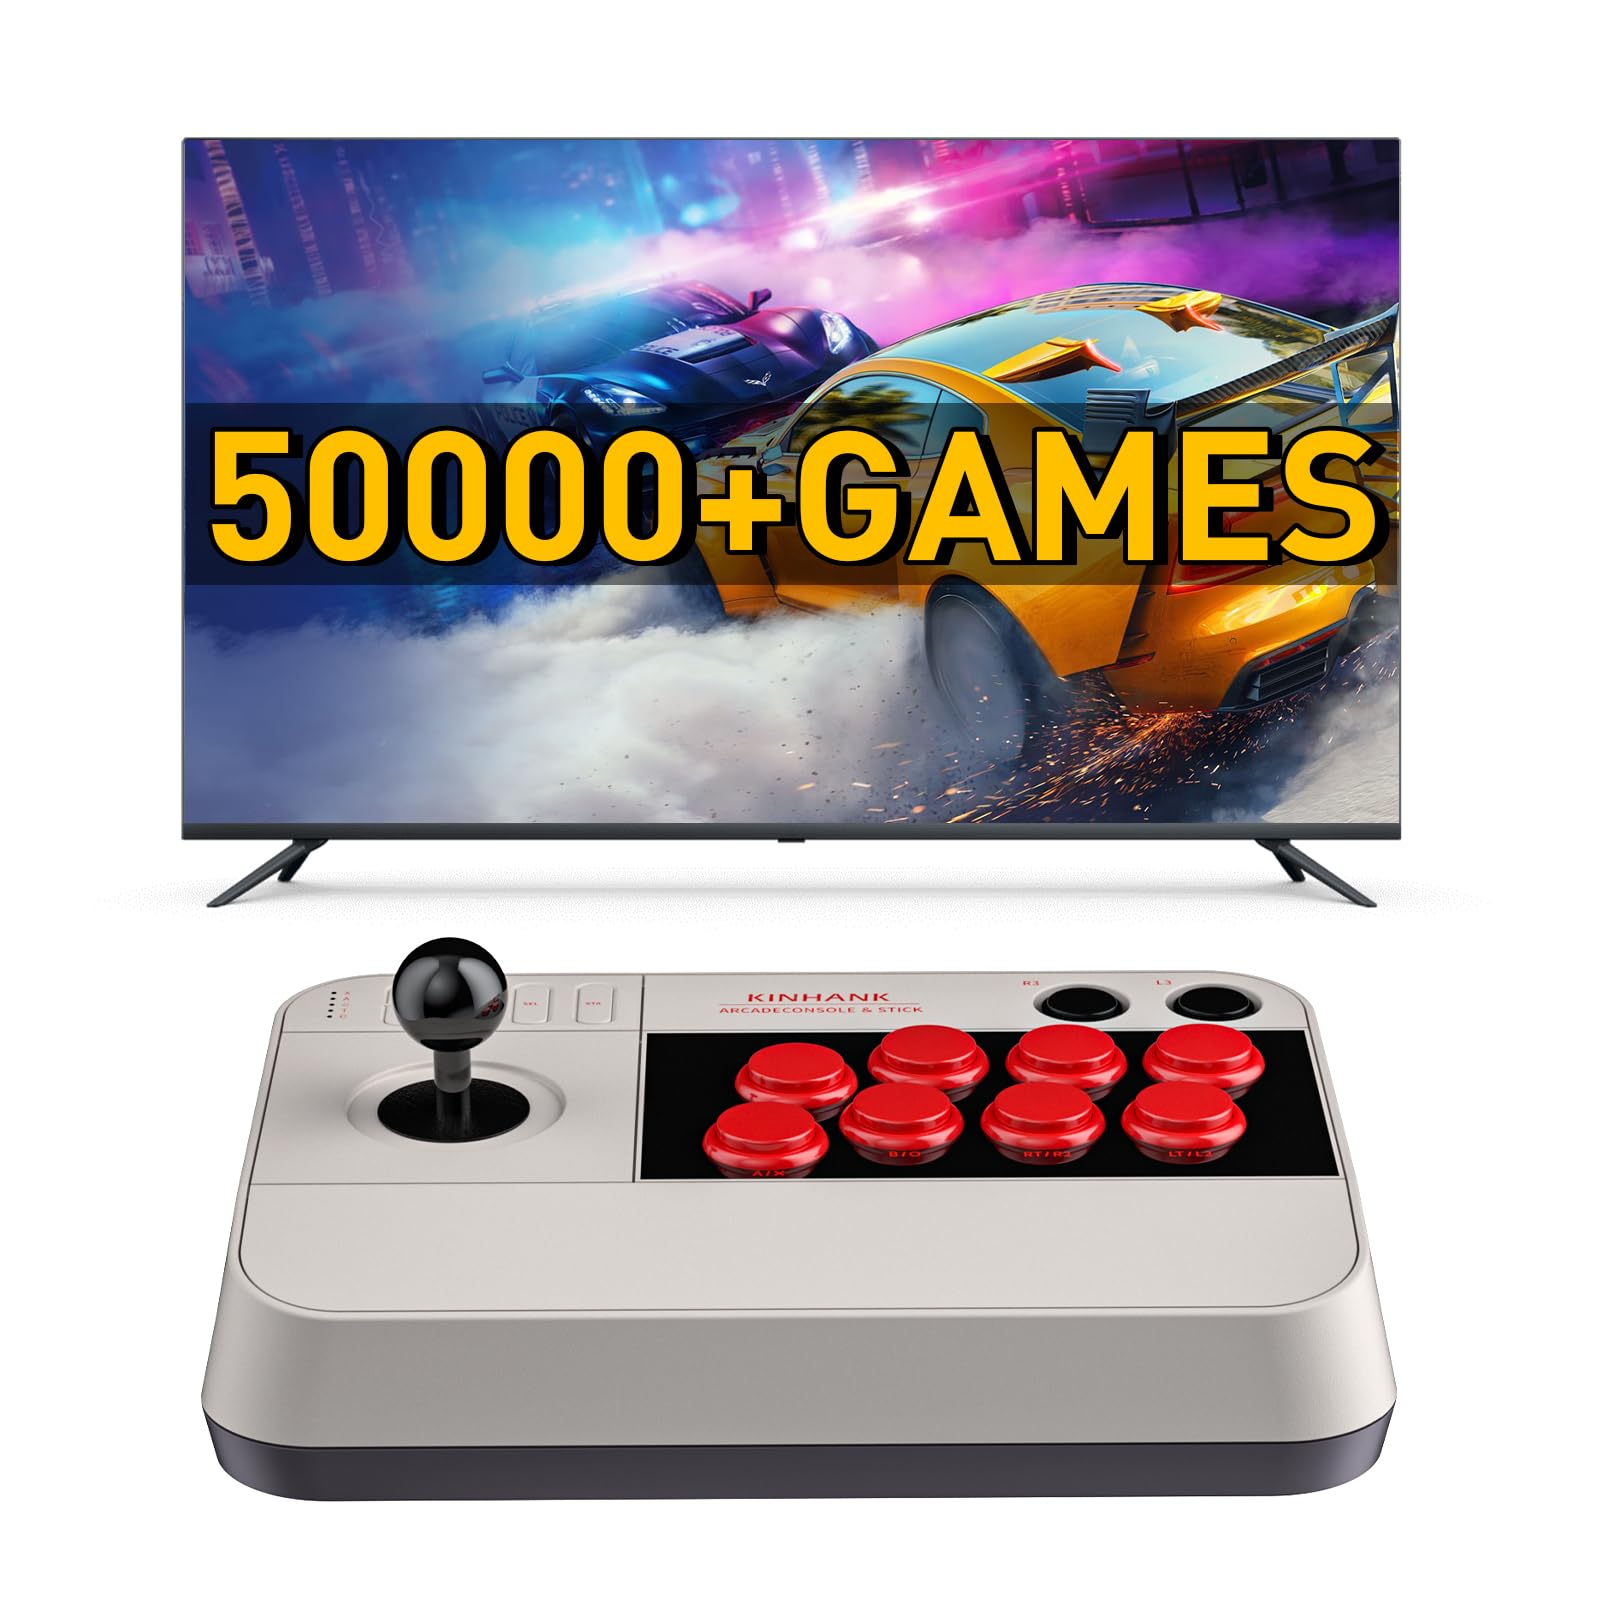 Kinhank Super Console X Arcade Stick/Joystick Game Console For PS3/TV Box/PC With 50000 Retro Arcade Games For PSP/PS1/DC/MAME